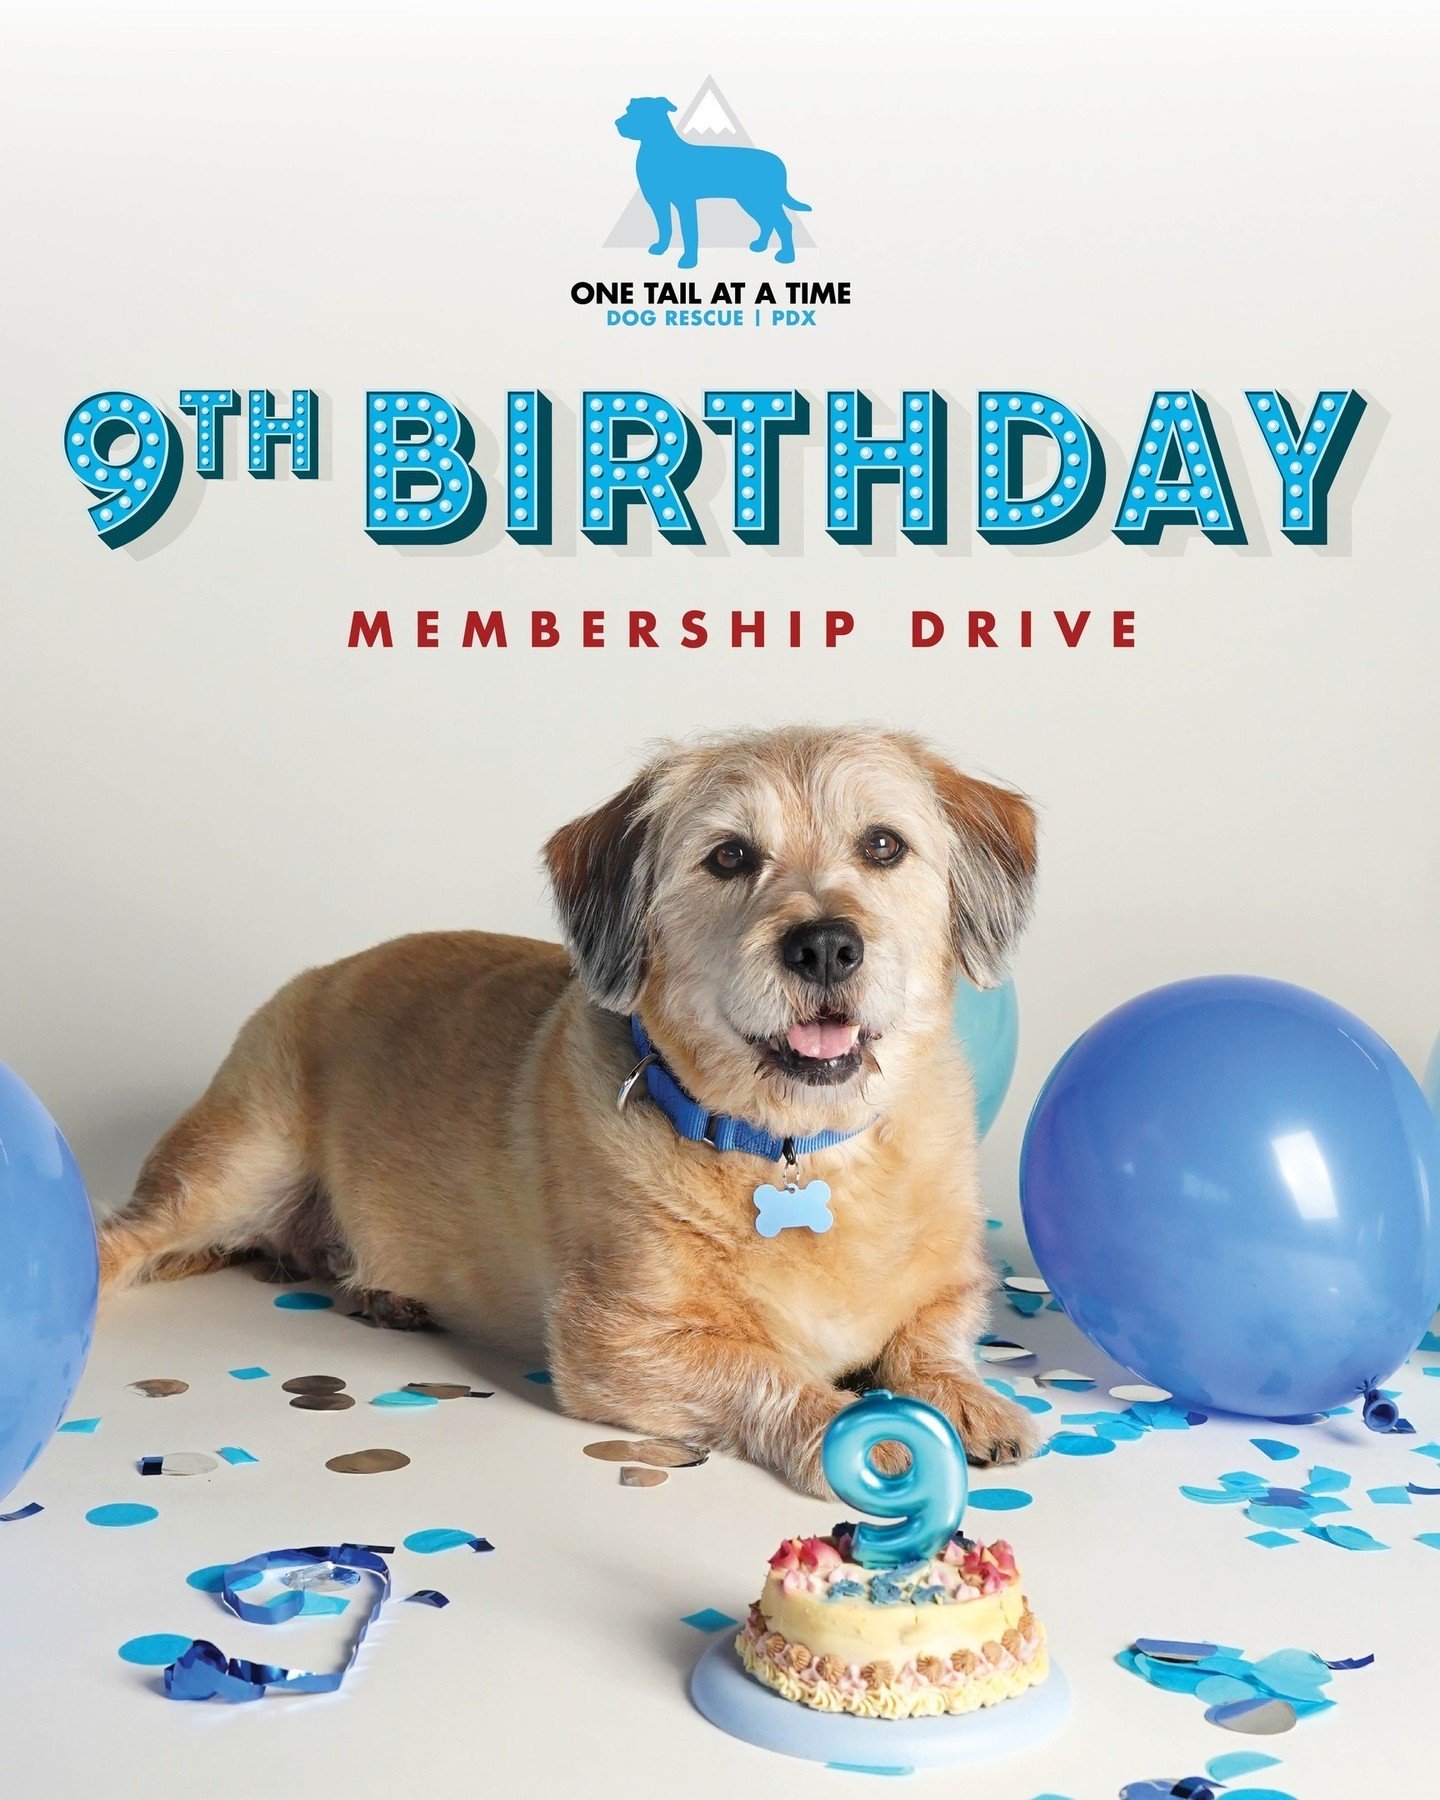 Happy 9th Birthday to us 💙⁠
⁠
Today marks 9 years of lifesaving work for OTAT PDX &ndash;&ndash; together, we've welcomed over 1,900 dogs to the Good Life! To celebrate, we're officially kicking off our 9th Birthday Membership Drive.⁠
⁠
Will you mak